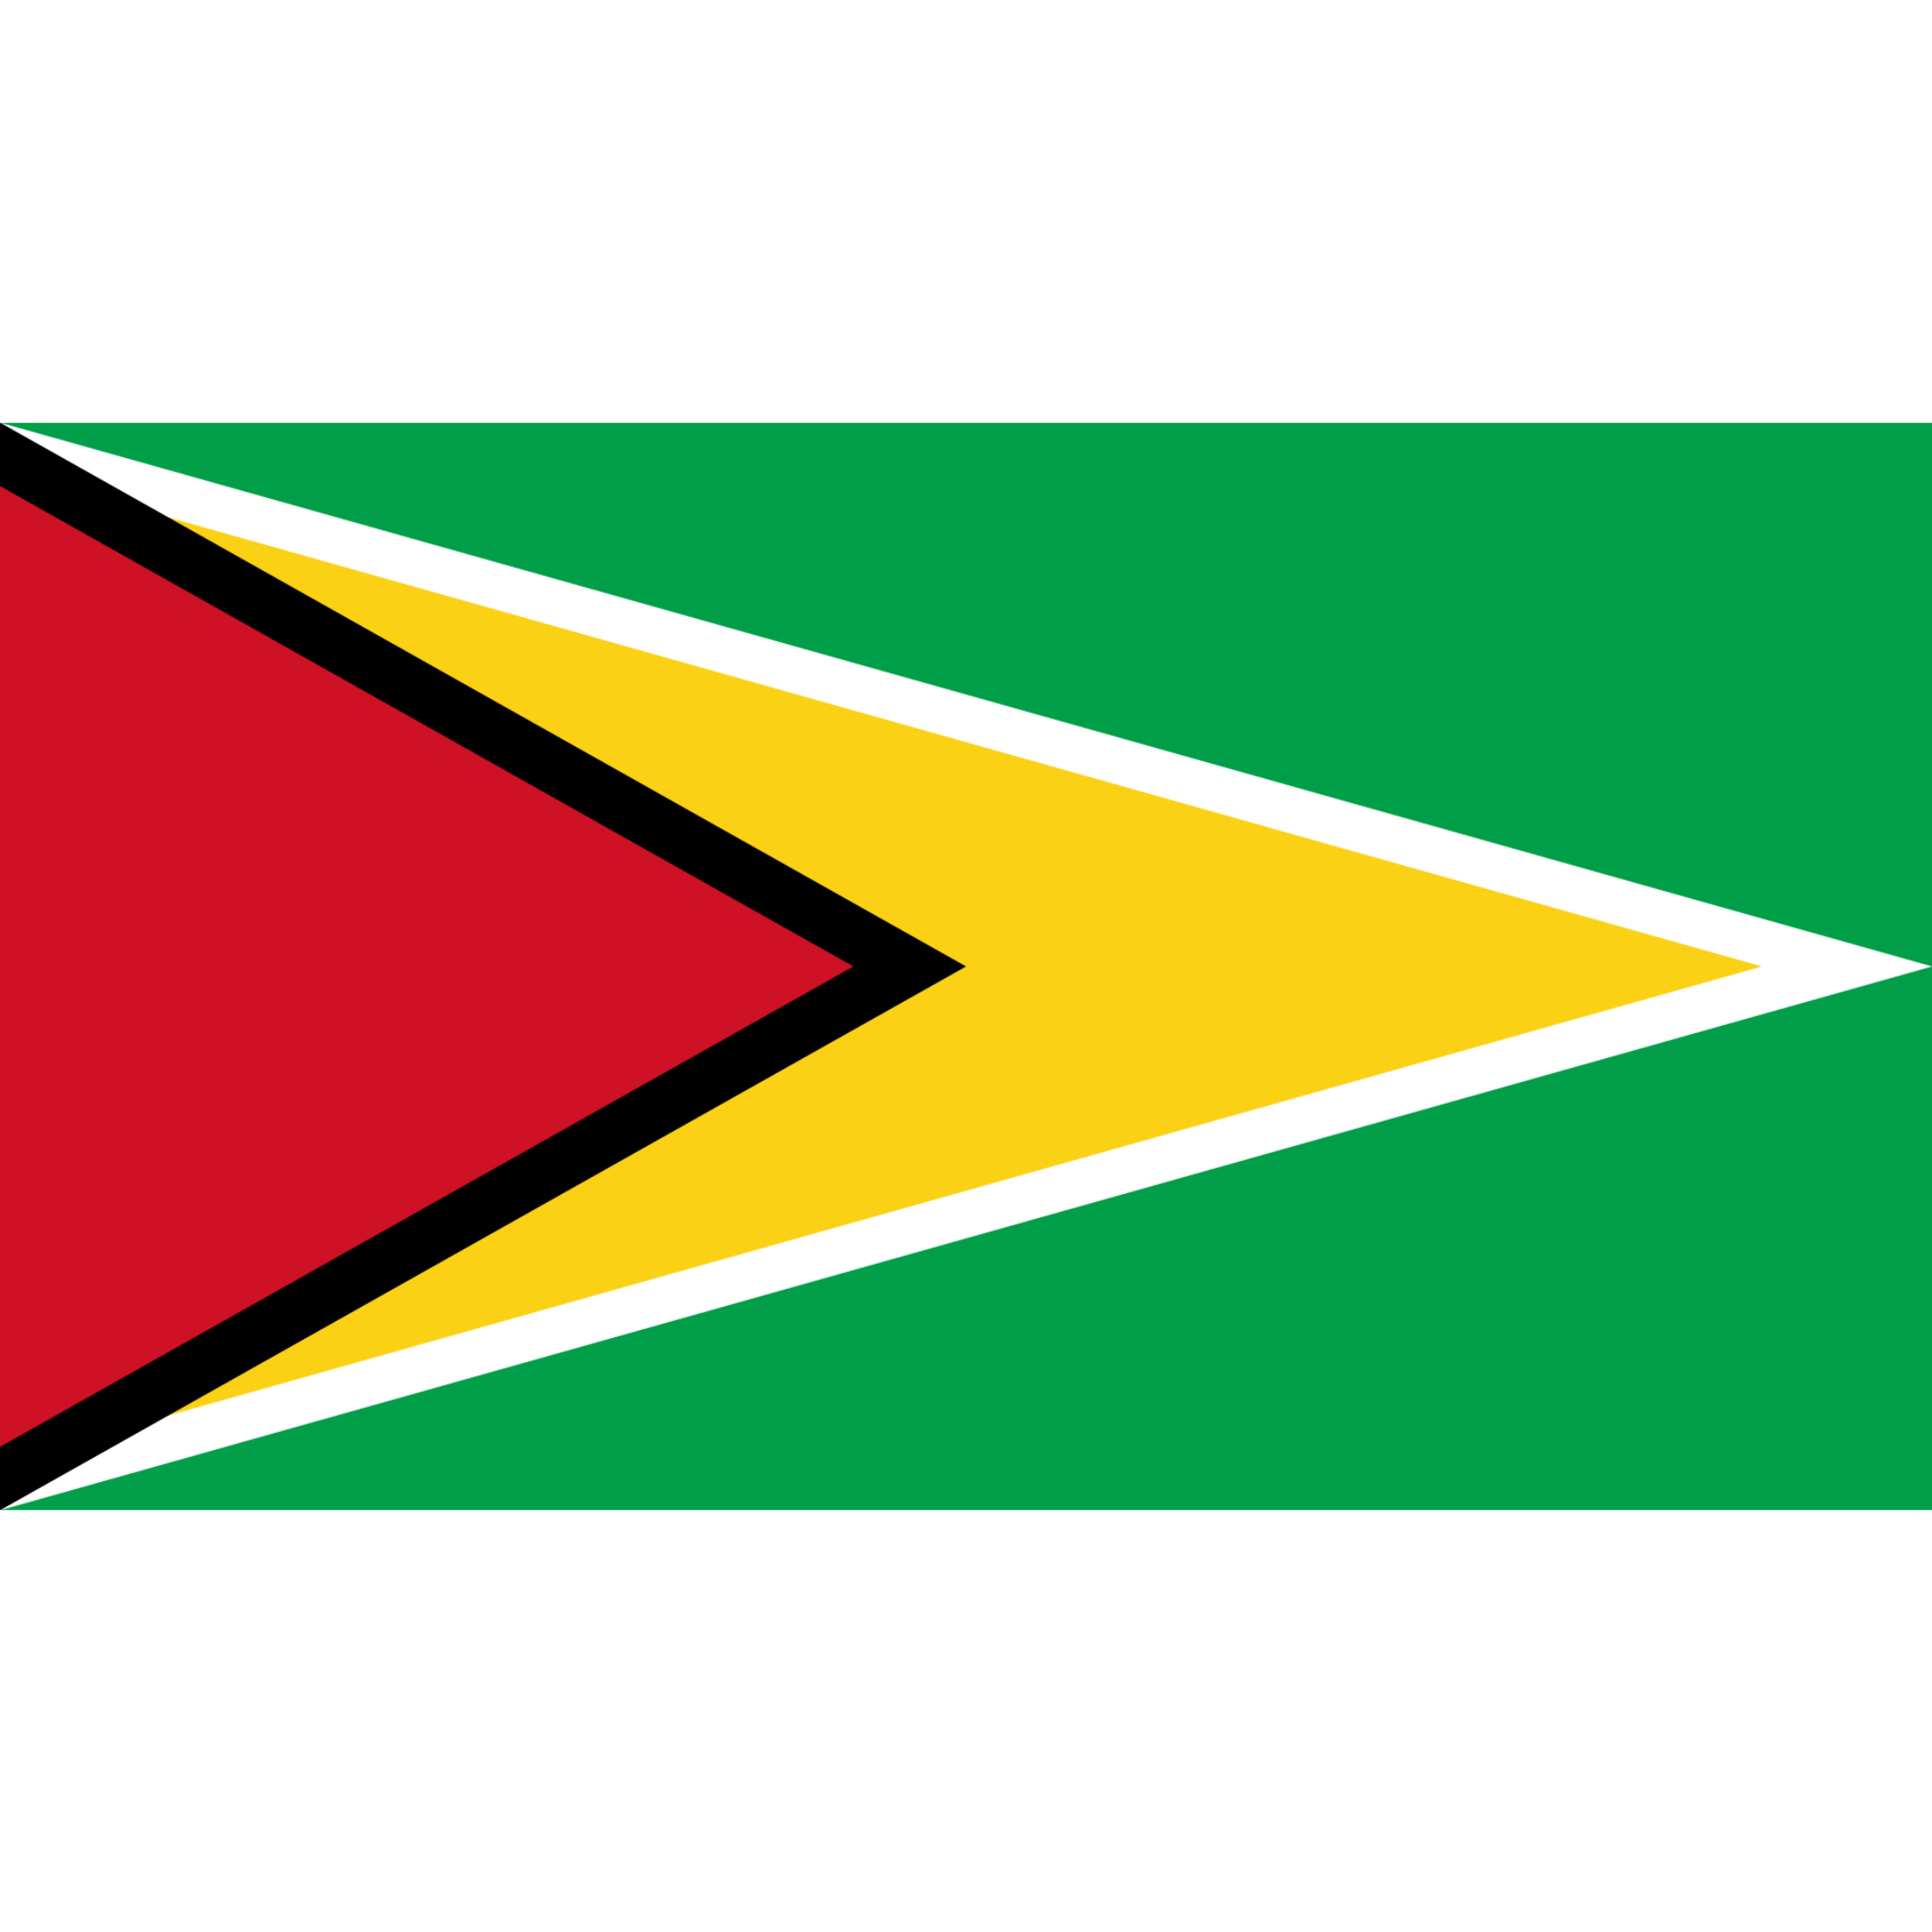 The Guyana Flag has a green background with a black edged red triangle and a larger white-edged golden triangle on the left.